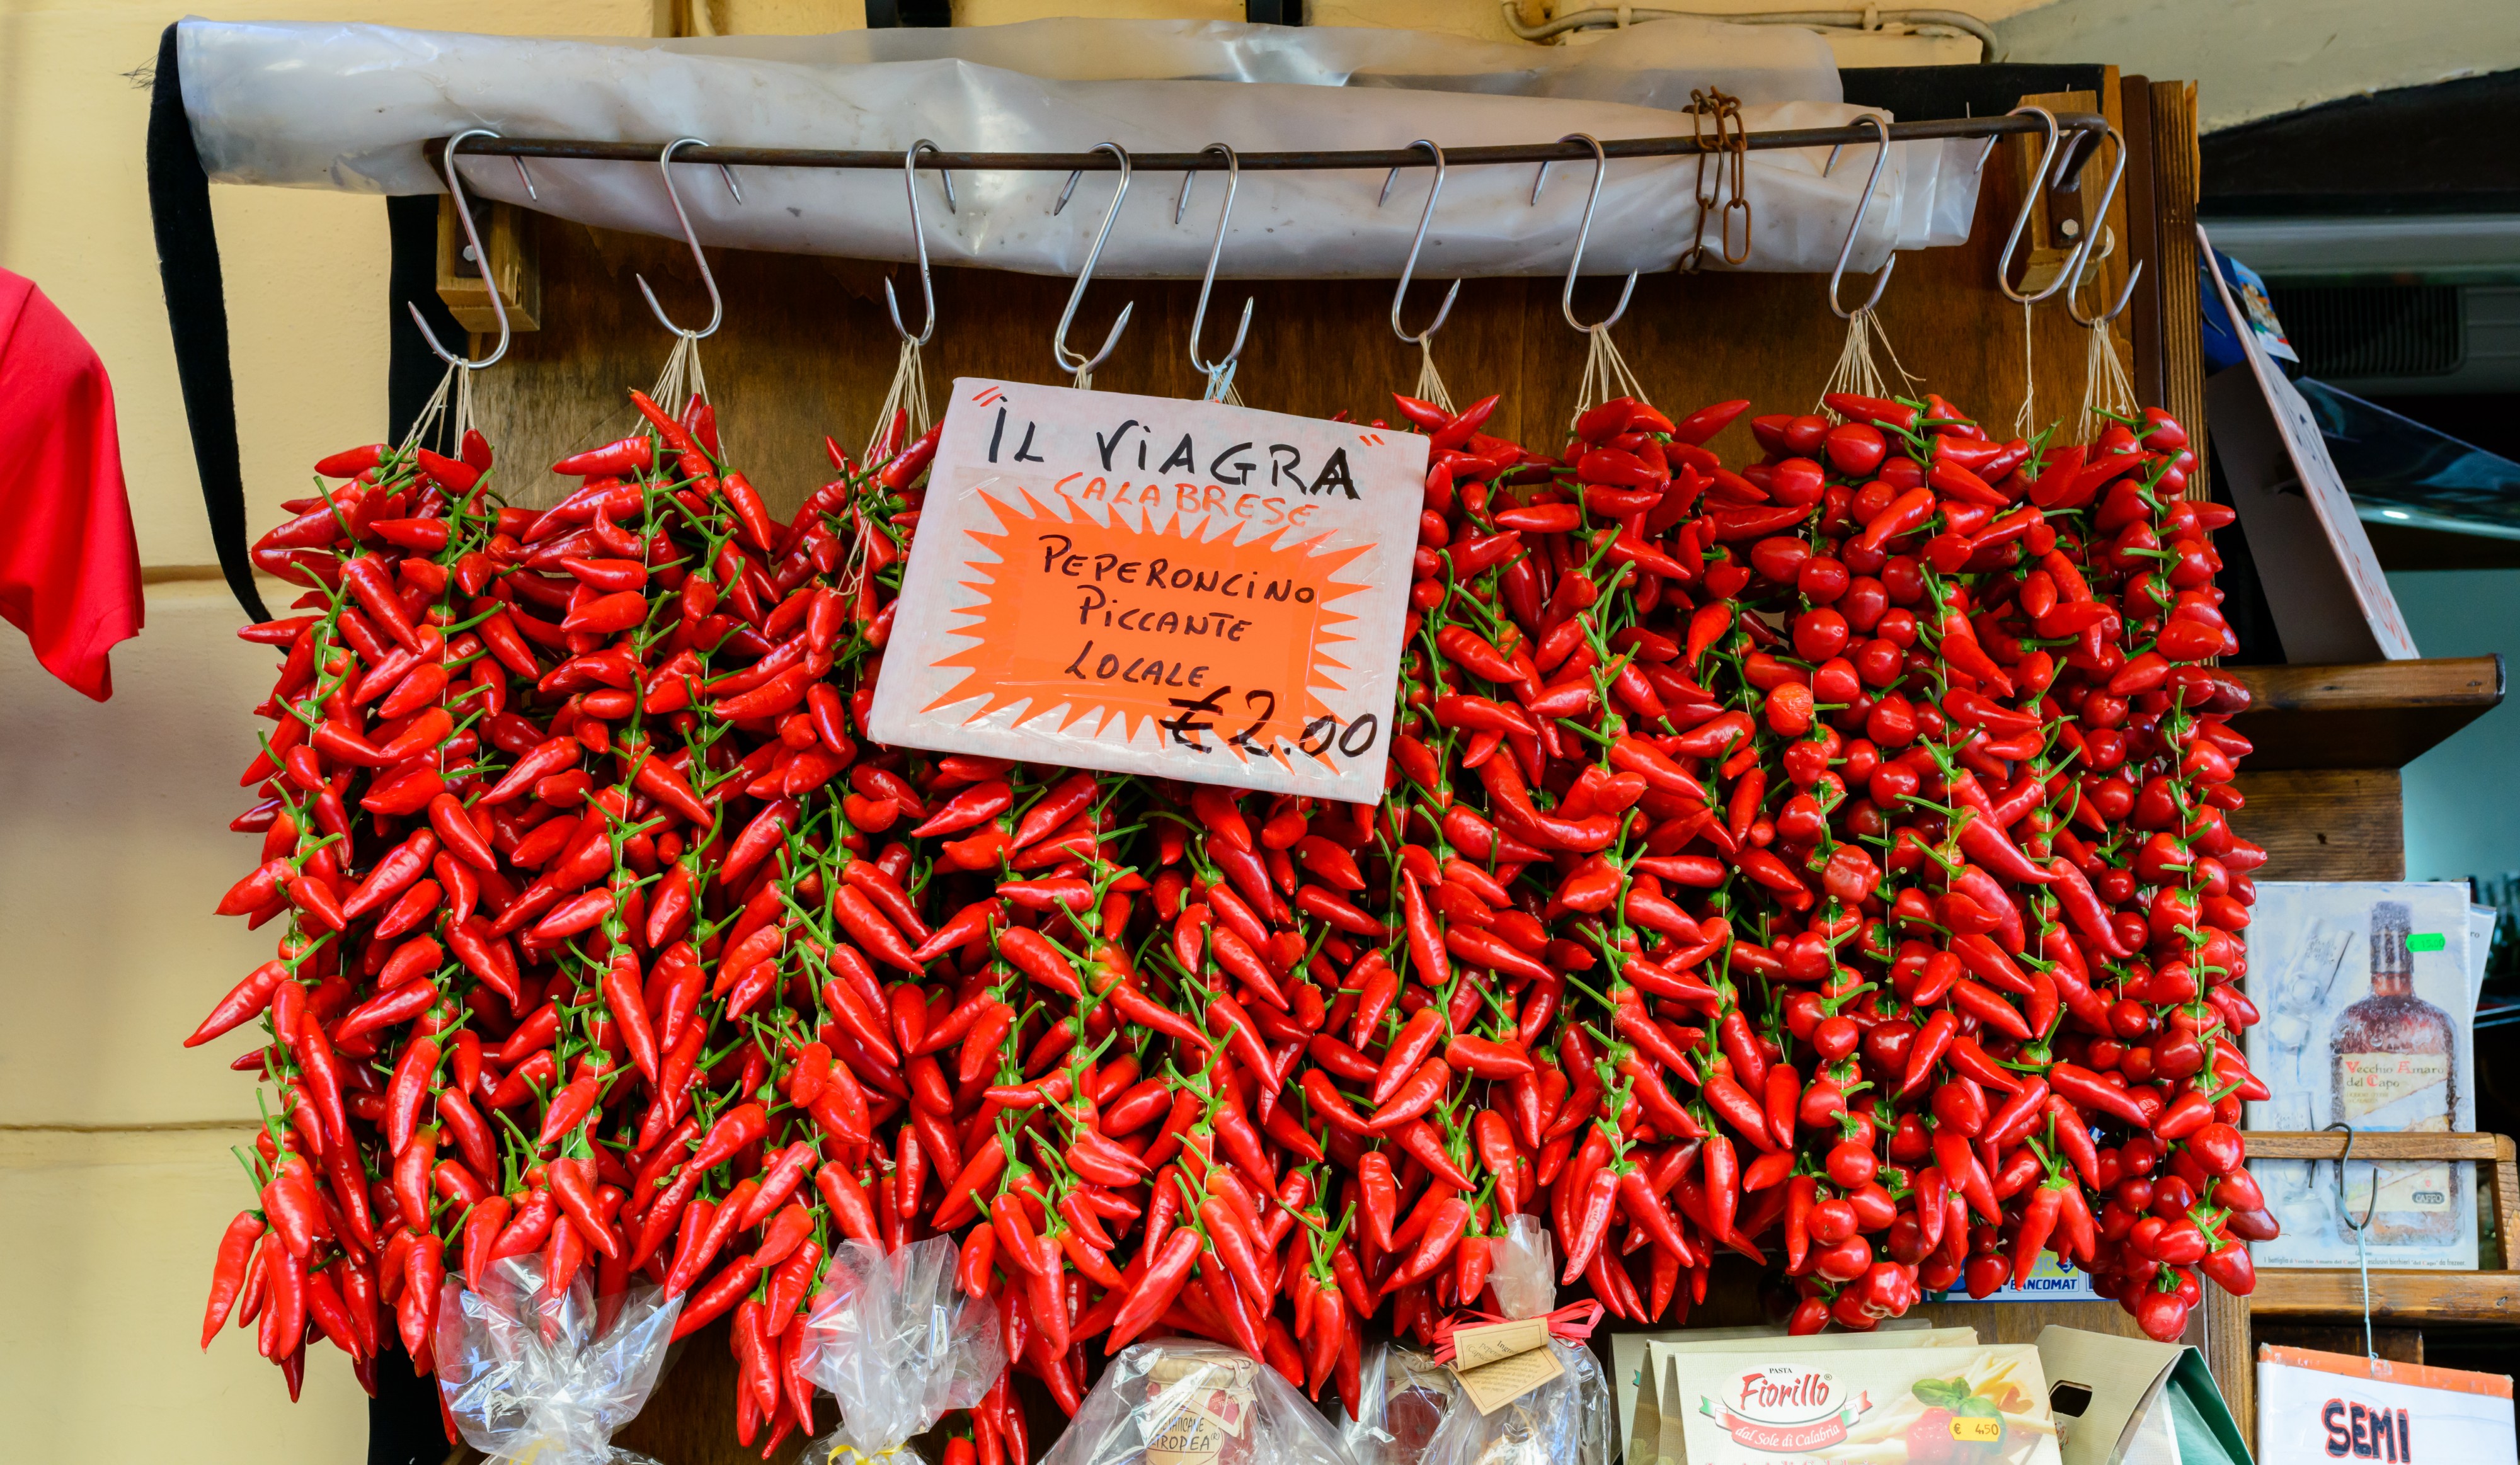 Capsicum -Chili - Peperoncino - Il Viagra Calabrese - Calabria - Italy - July 17th 2013 - 01